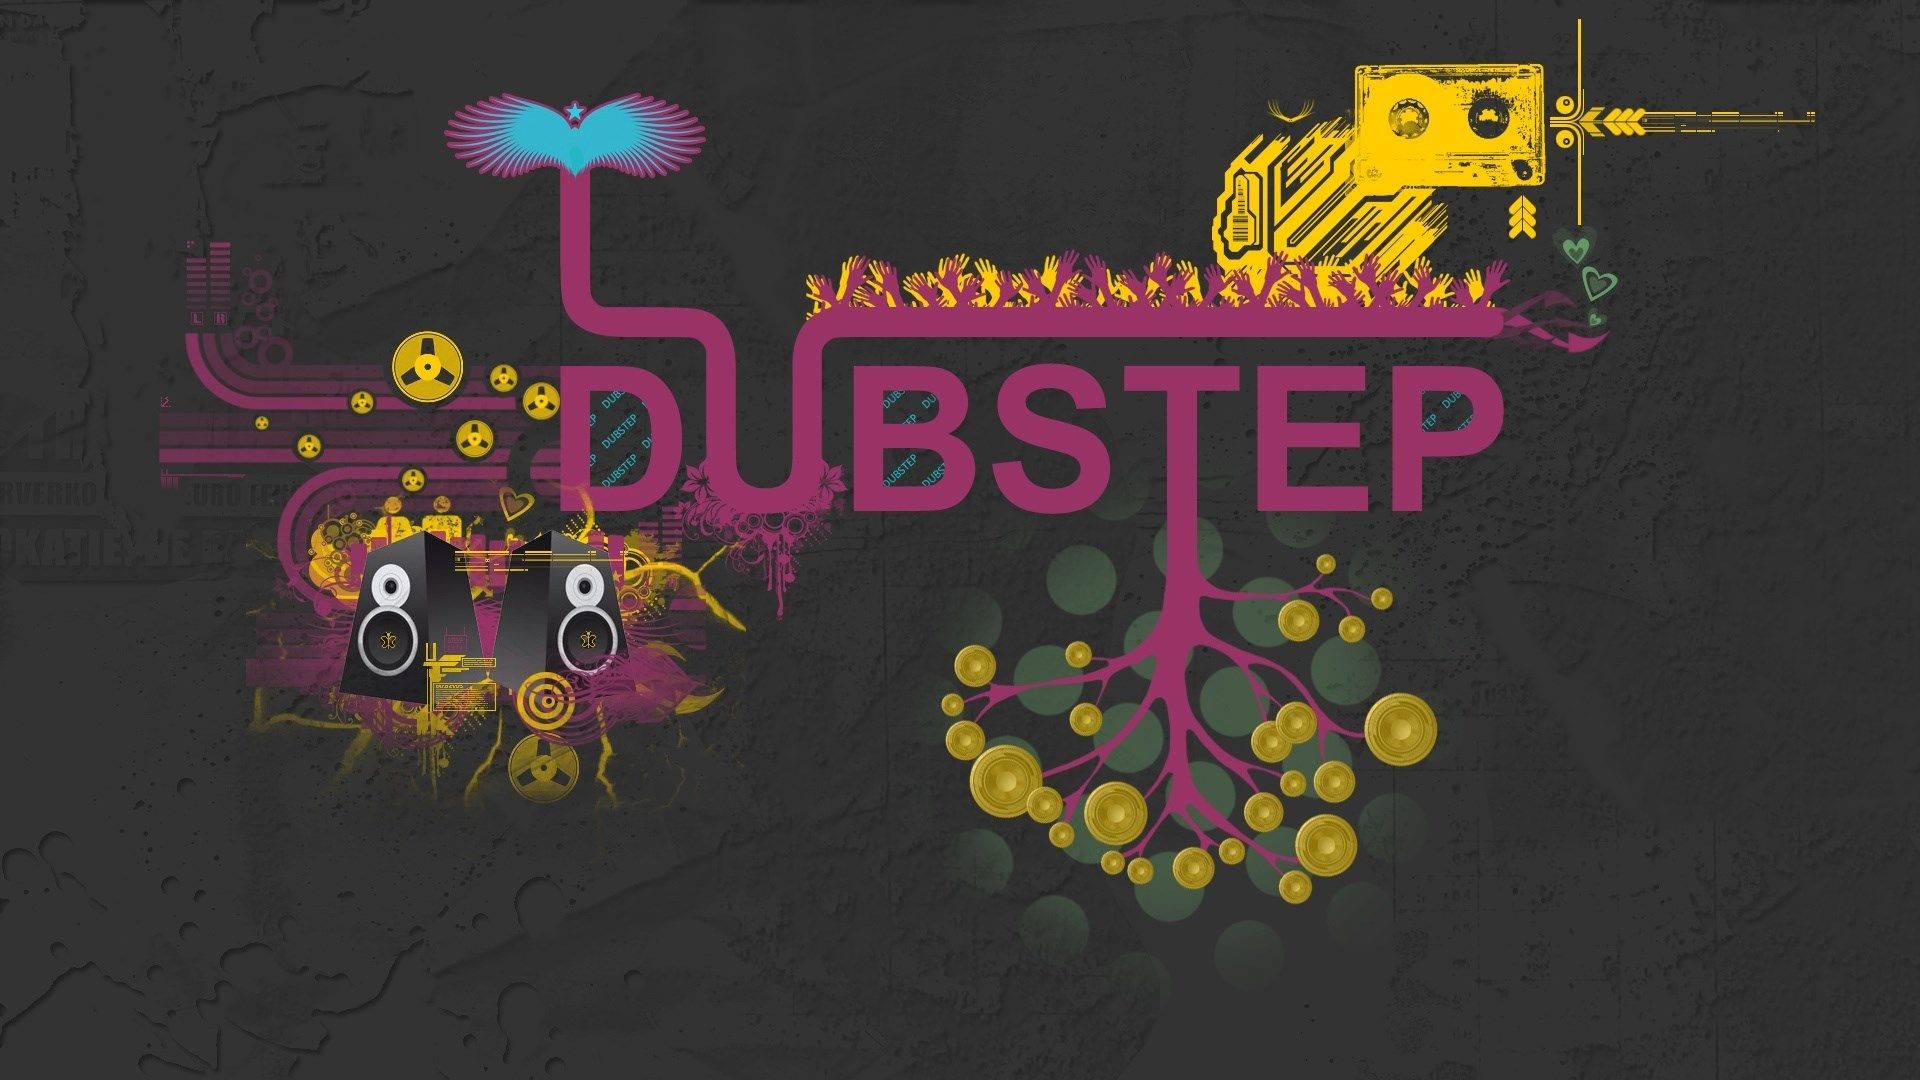 1920x1080 dubstep wallpapers hd images download Cool Desktop Wallpapers, Hd  Widescreen Wallpapers, Music Wallpaper,